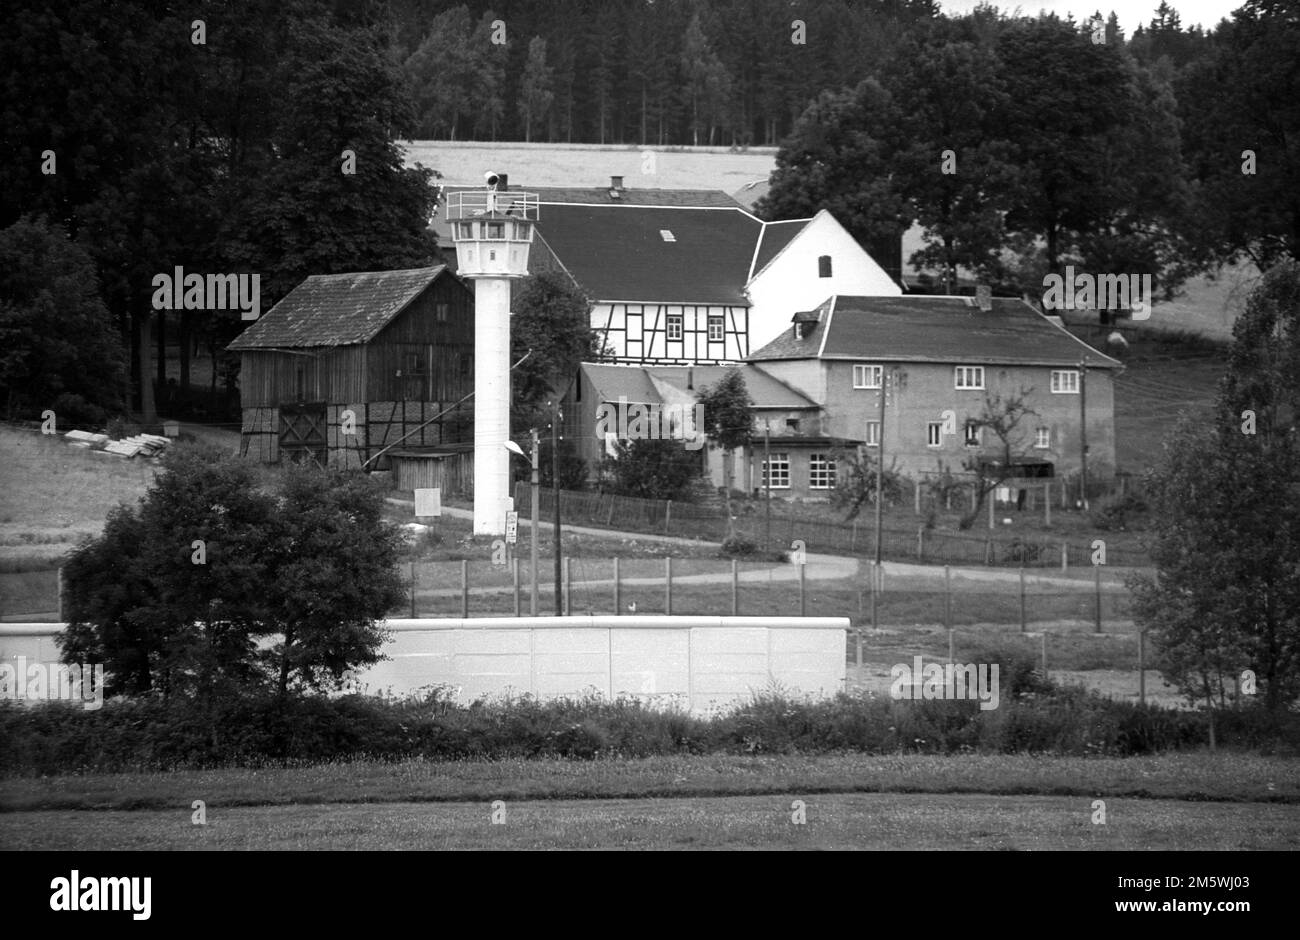 Germany, Moedlareuth, 18. 08. 1991, watchtower, wall, residential buildings, in the former border village of Moedlareuth in Thuringia, the village Stock Photo